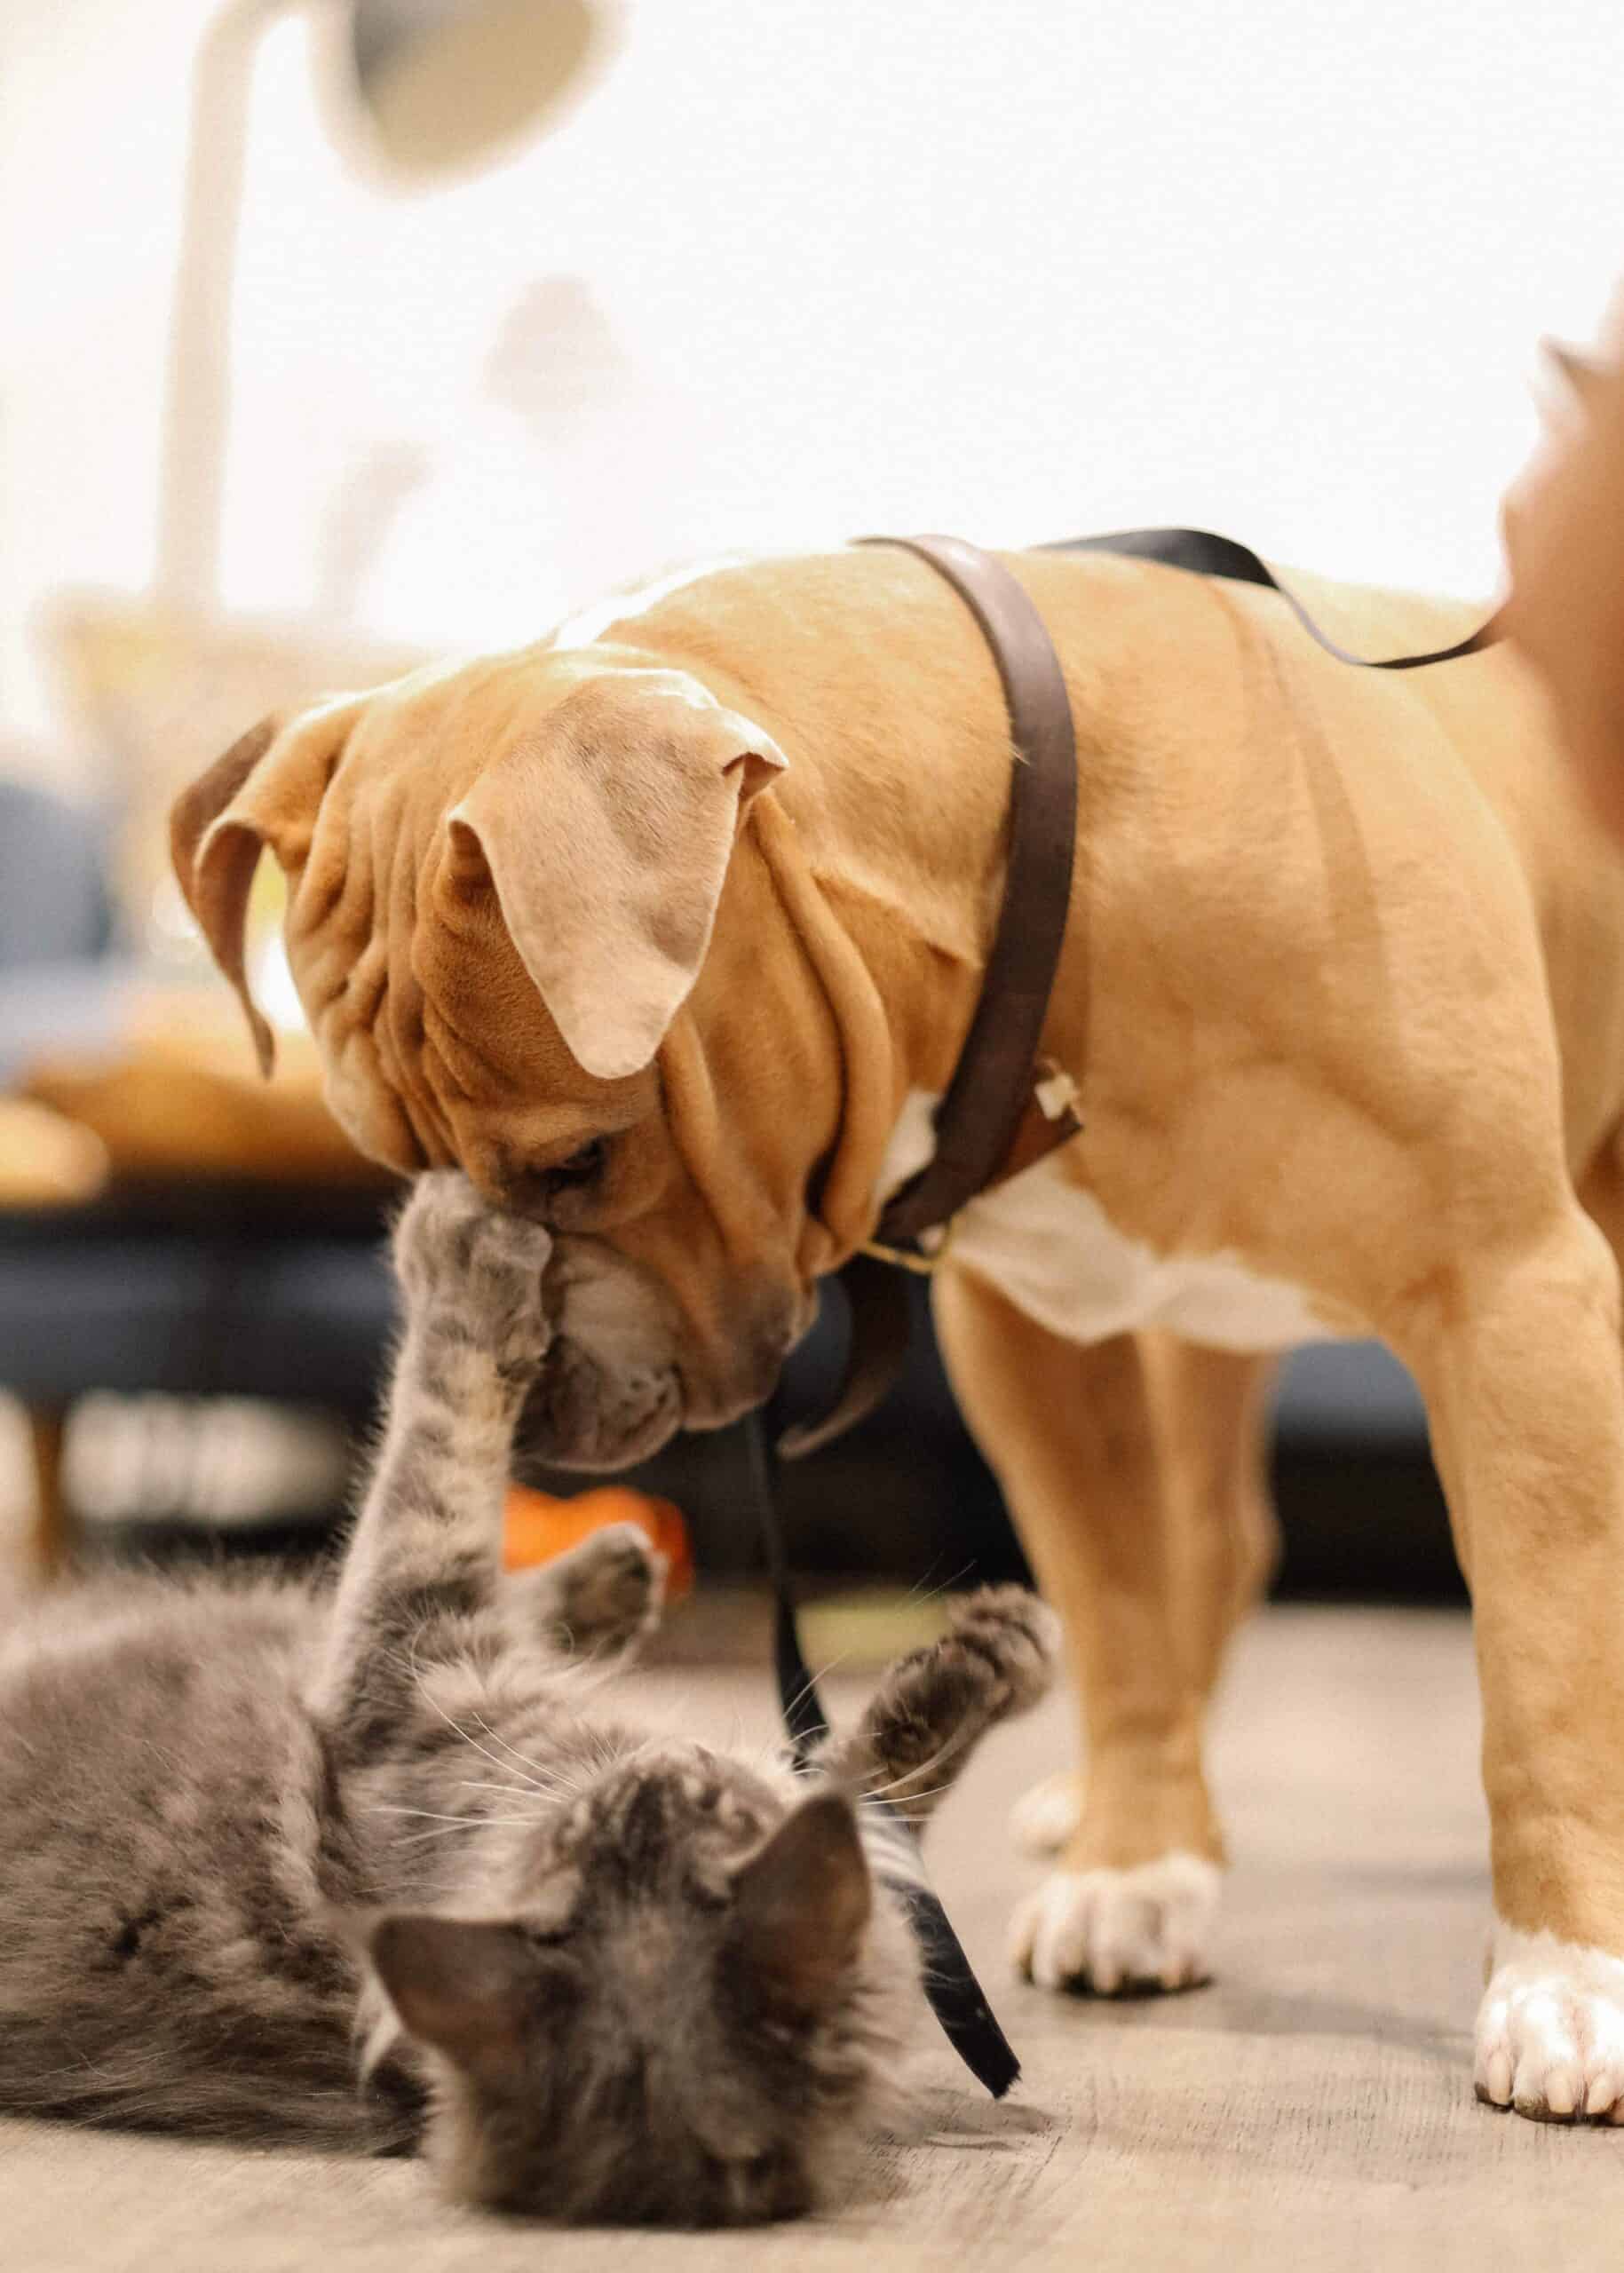 Dog and cat playing together